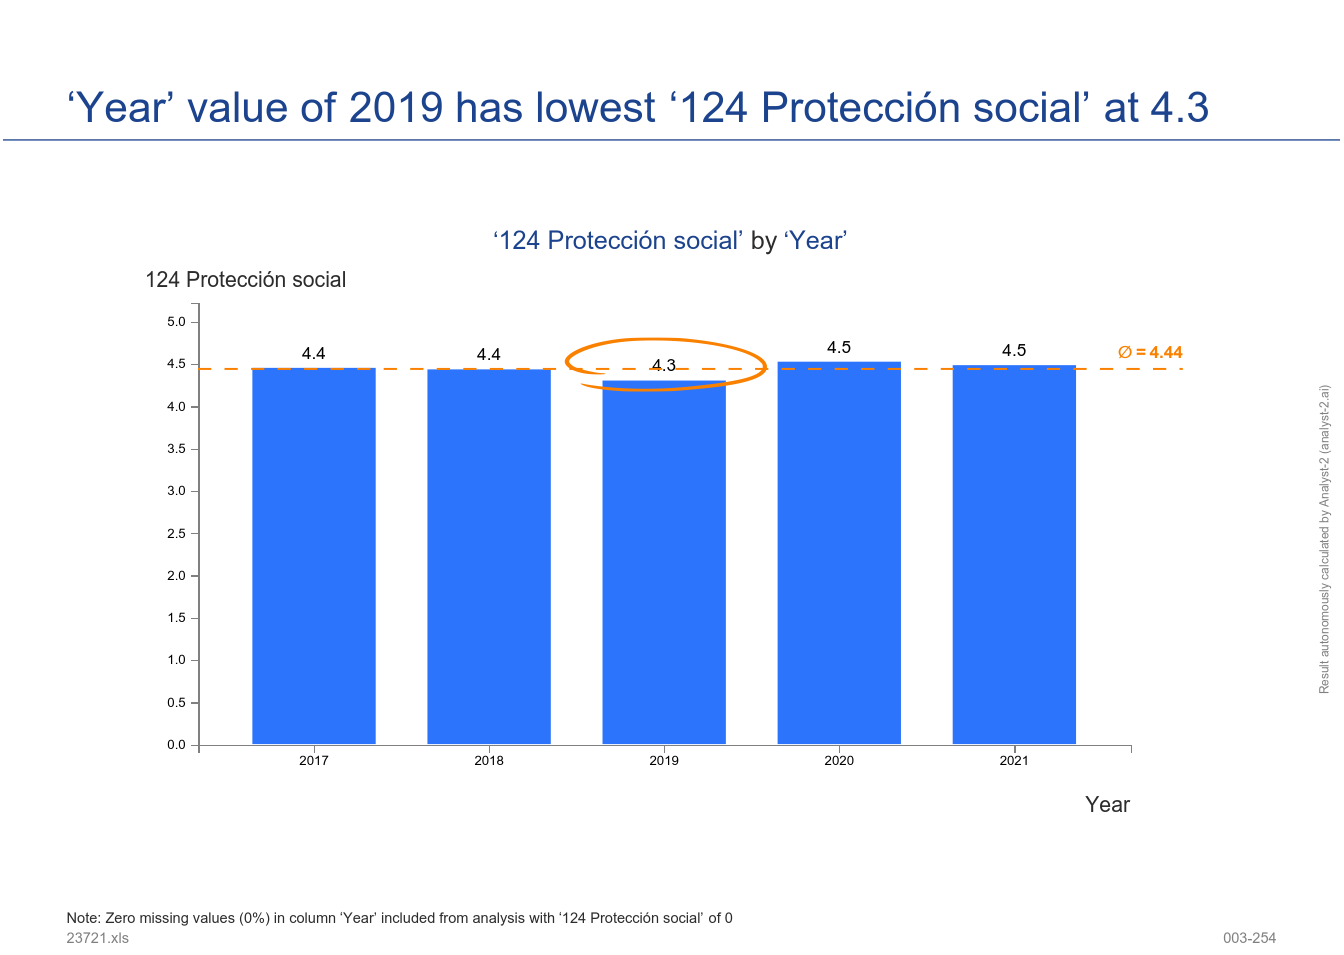 The ‘Year’ value of 2019 has the lowest ‘124 Protección social’ at 4.3. (Subgroup weightings. IPC (API identifier: 23721) - 003-254)